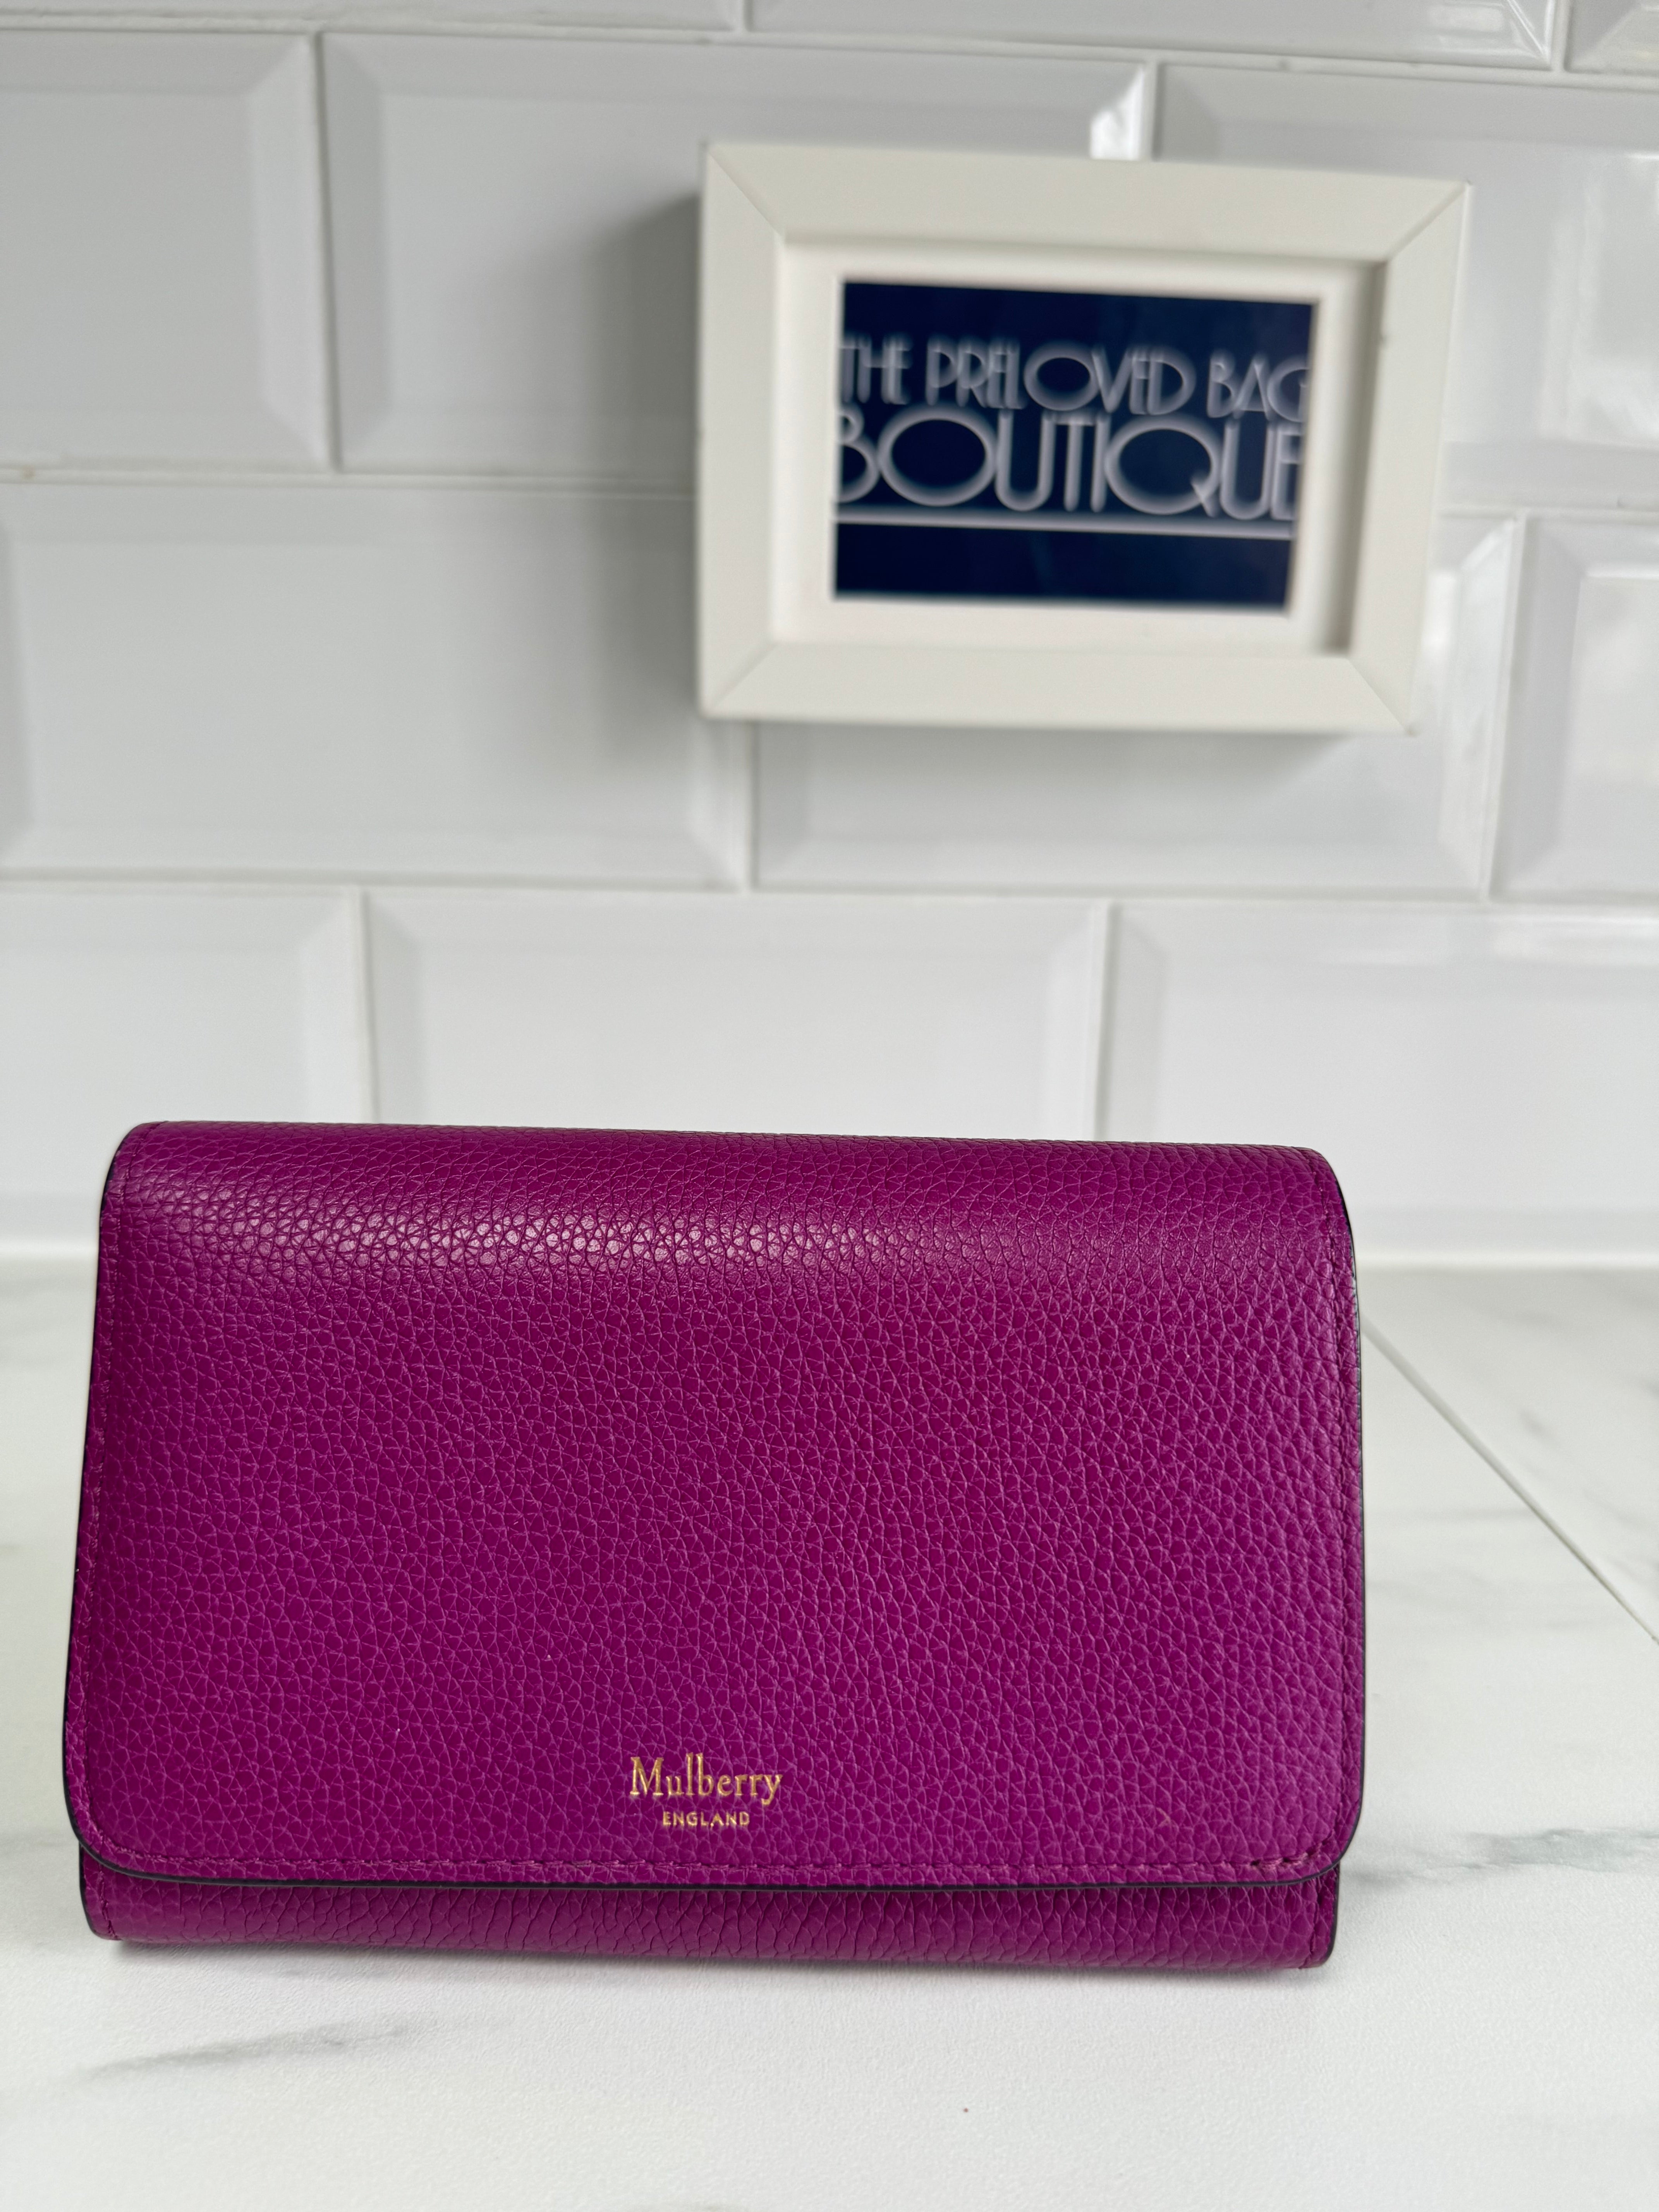 Mulberry | Bags | Mulberry Mitzy Purple Patent Leather Silver Zip Top Pouch  Clutch Vguc | Poshmark